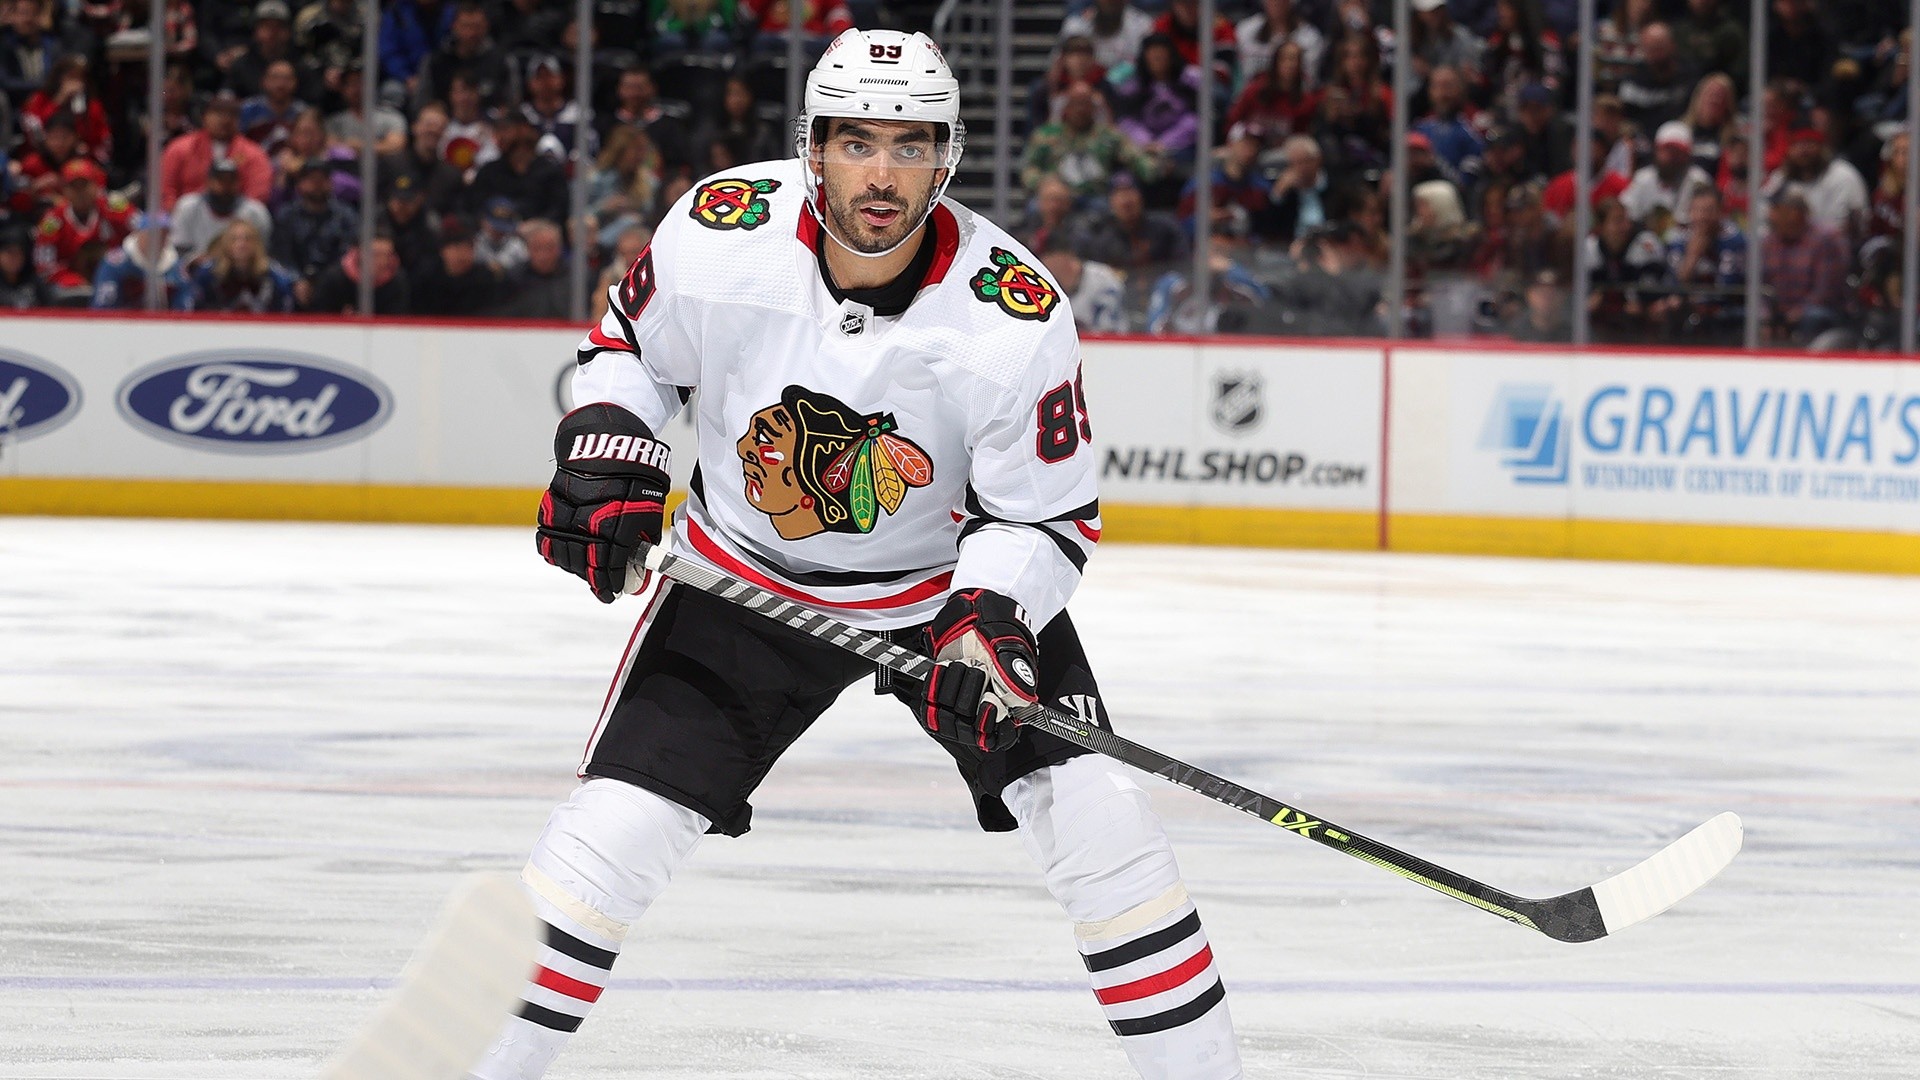 The Rink - Blackhawks sign MacKenzie Entwistle to two-year extension